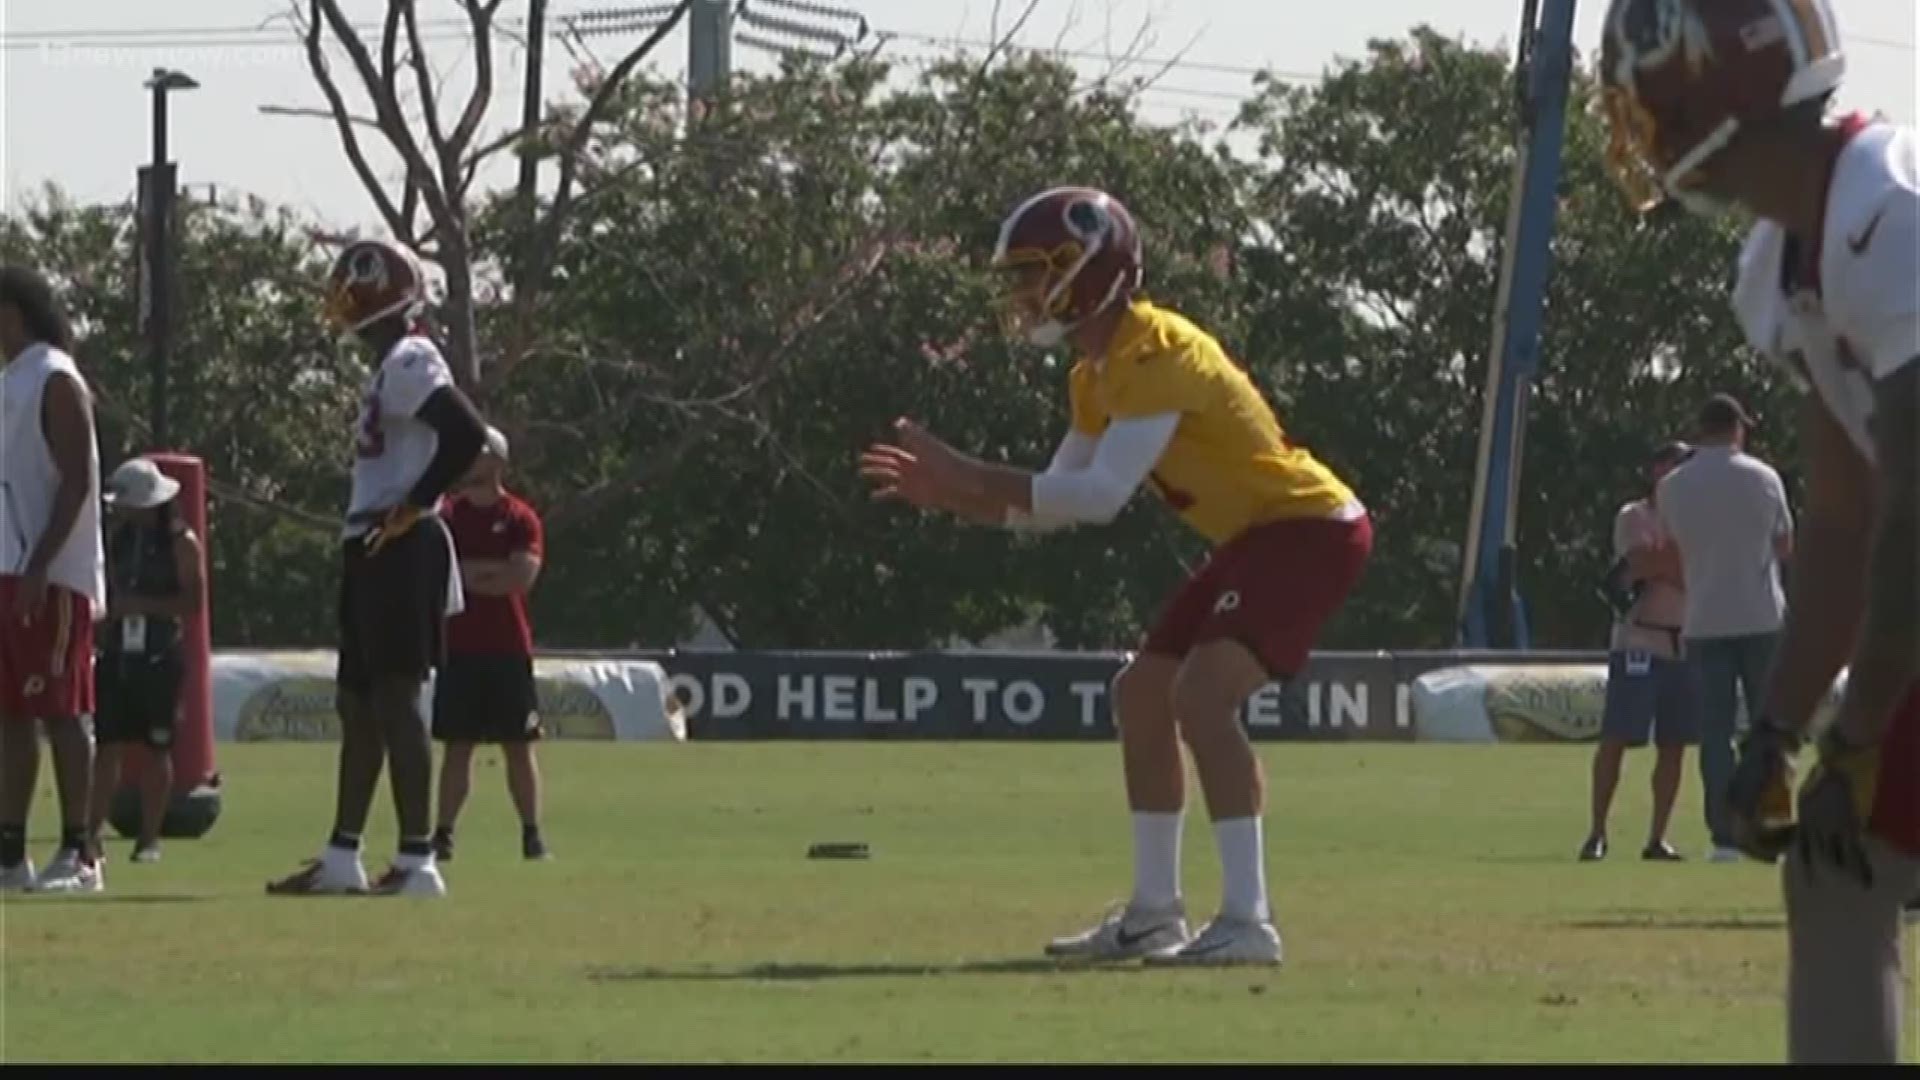 After 15 sessions, the Redskins broke camp in Richmond on Tuesday. The remaining 3 1/2 weeks of preseason will play out at Redskins Park.